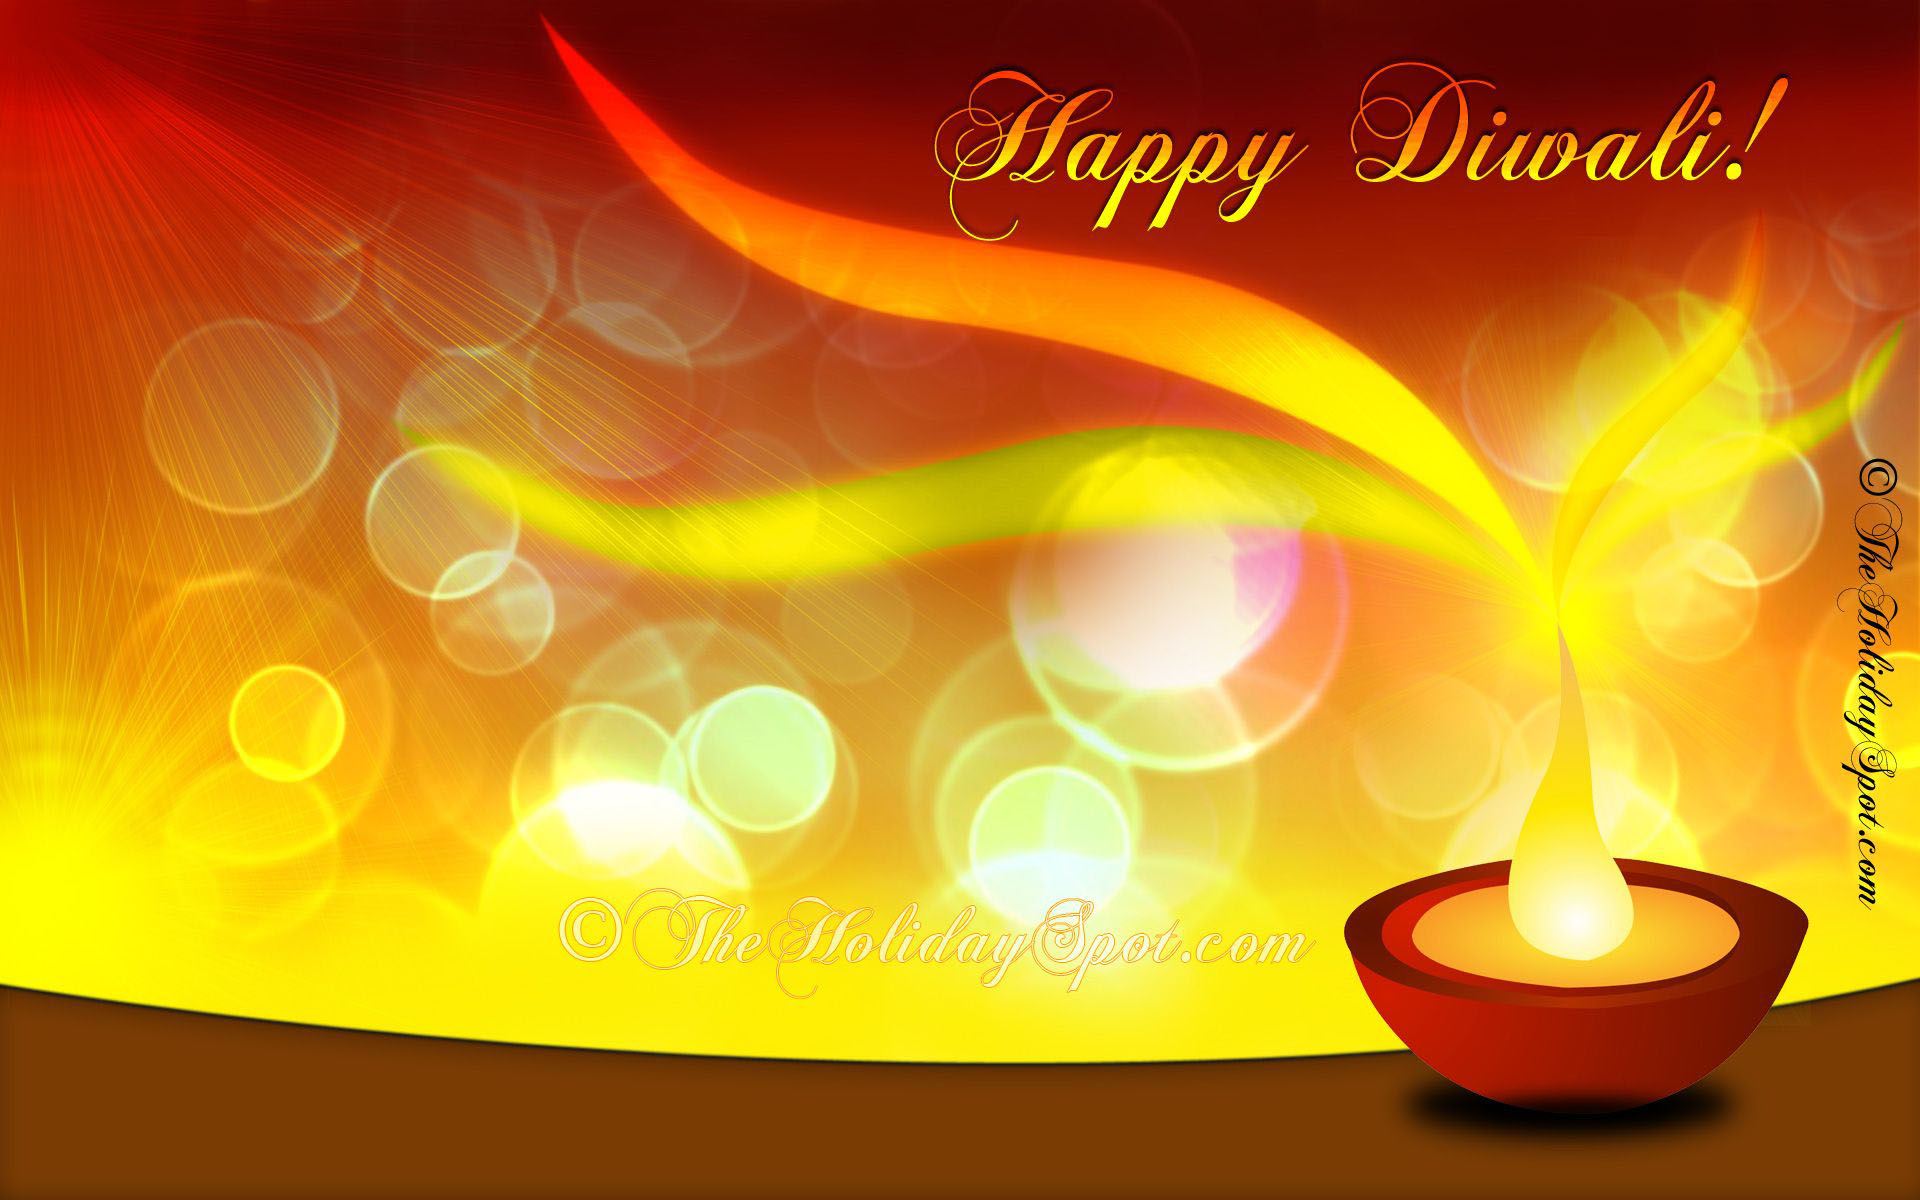 Happy Diwali and New Year Wallpaper Free Download